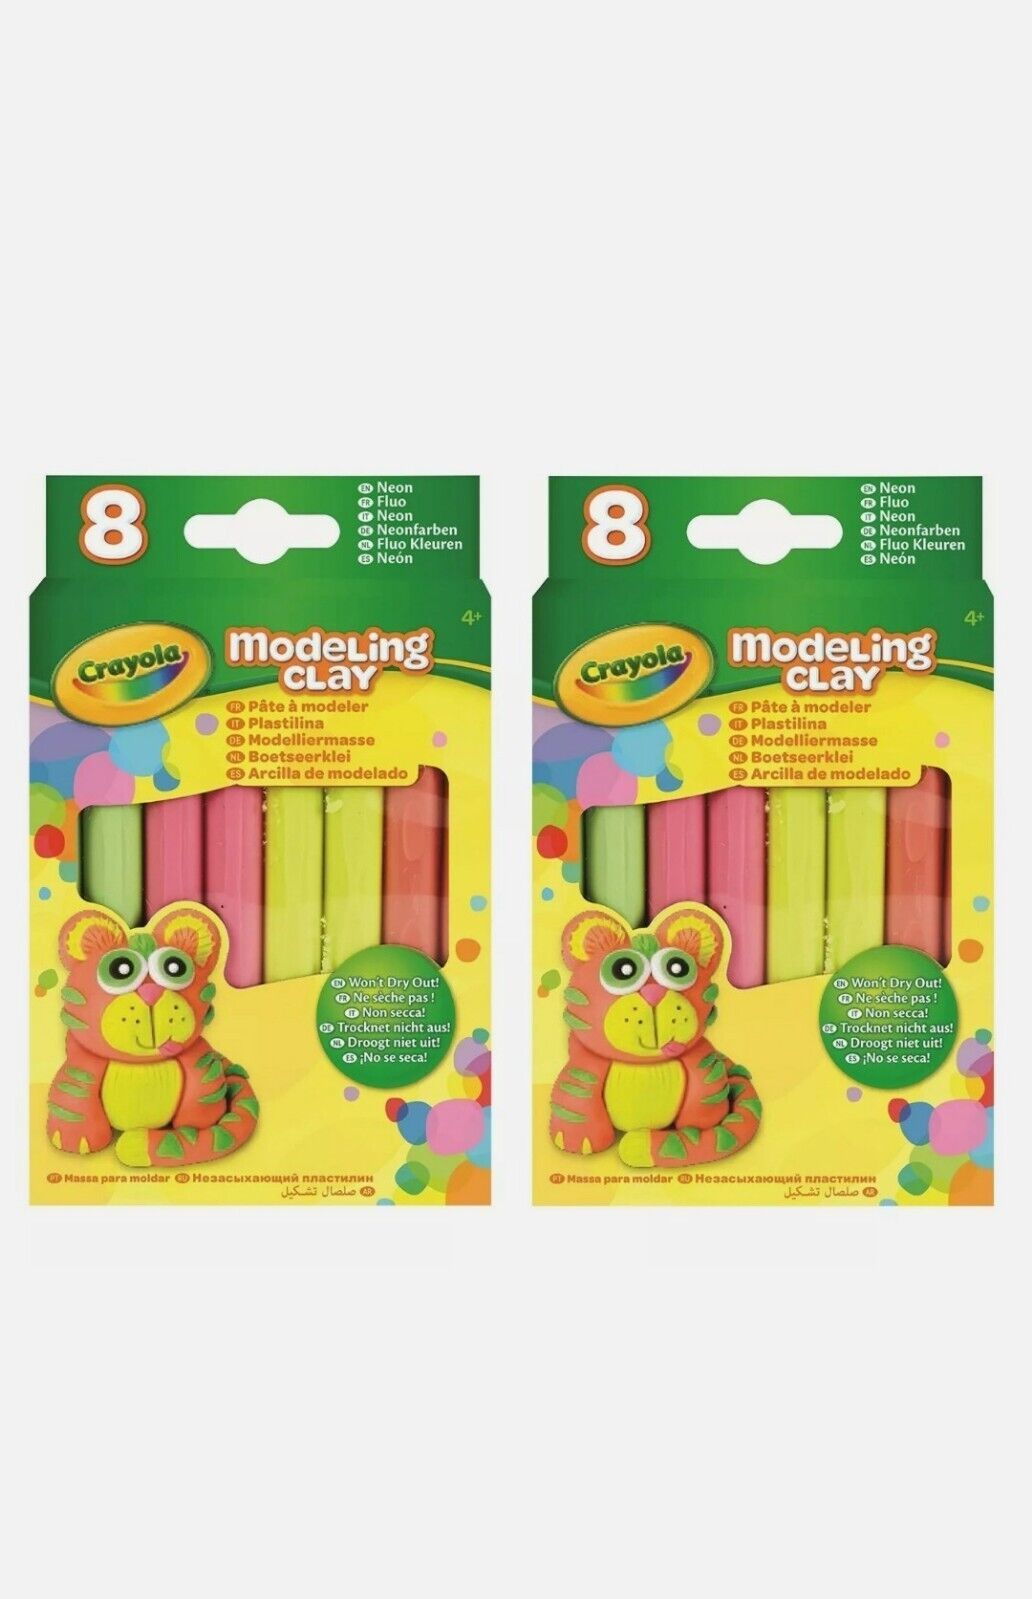 Primary image for Crayola Modeling Clay, Neon Colors, Gift for Kids 16-Count Assorted Neon, 2 Pack